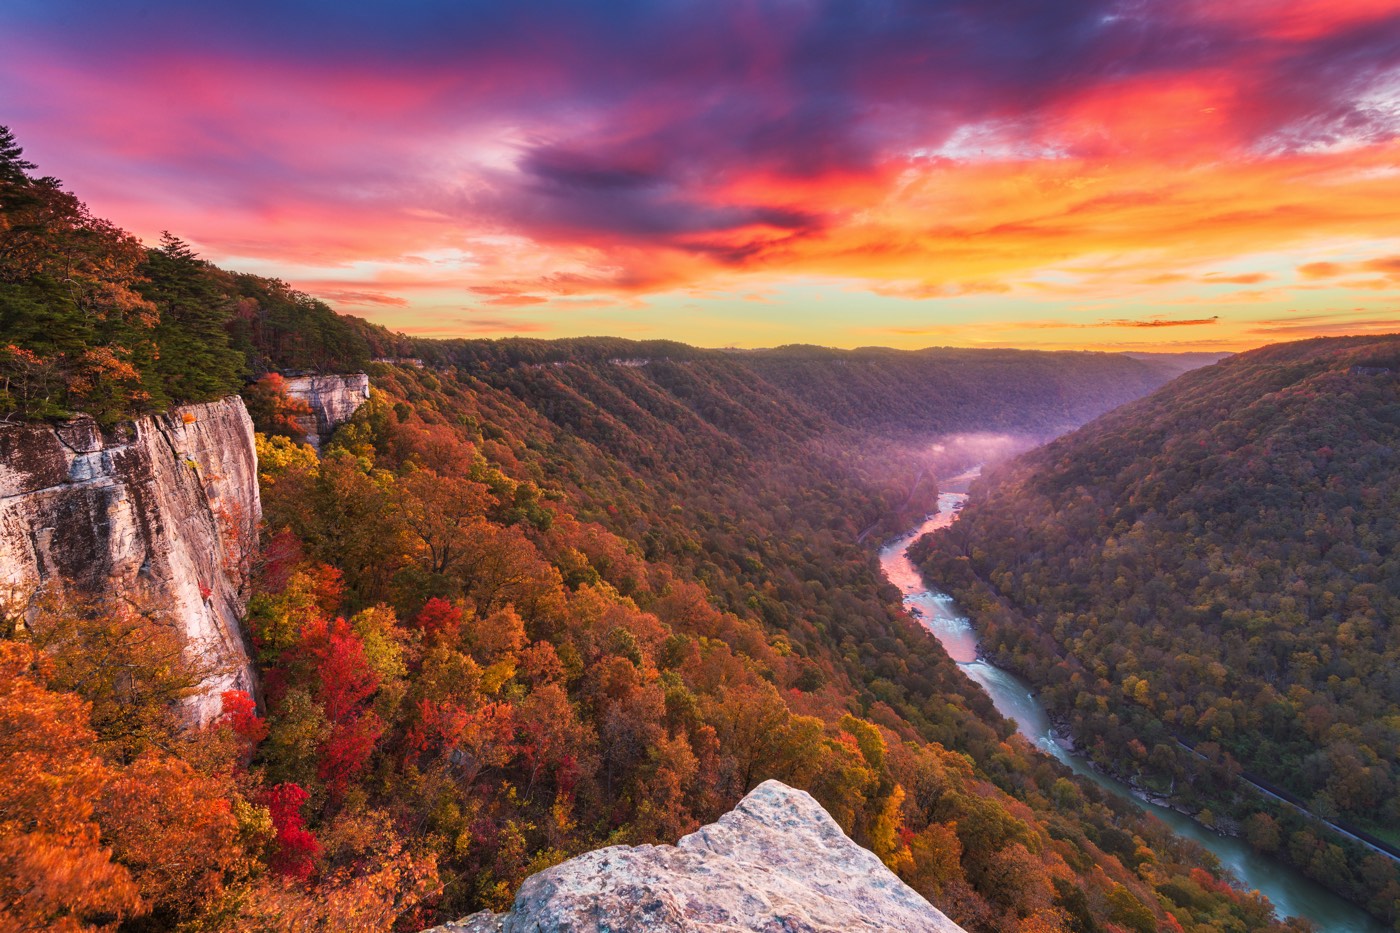 THINGS TO DO IN WEST VIRGINIA